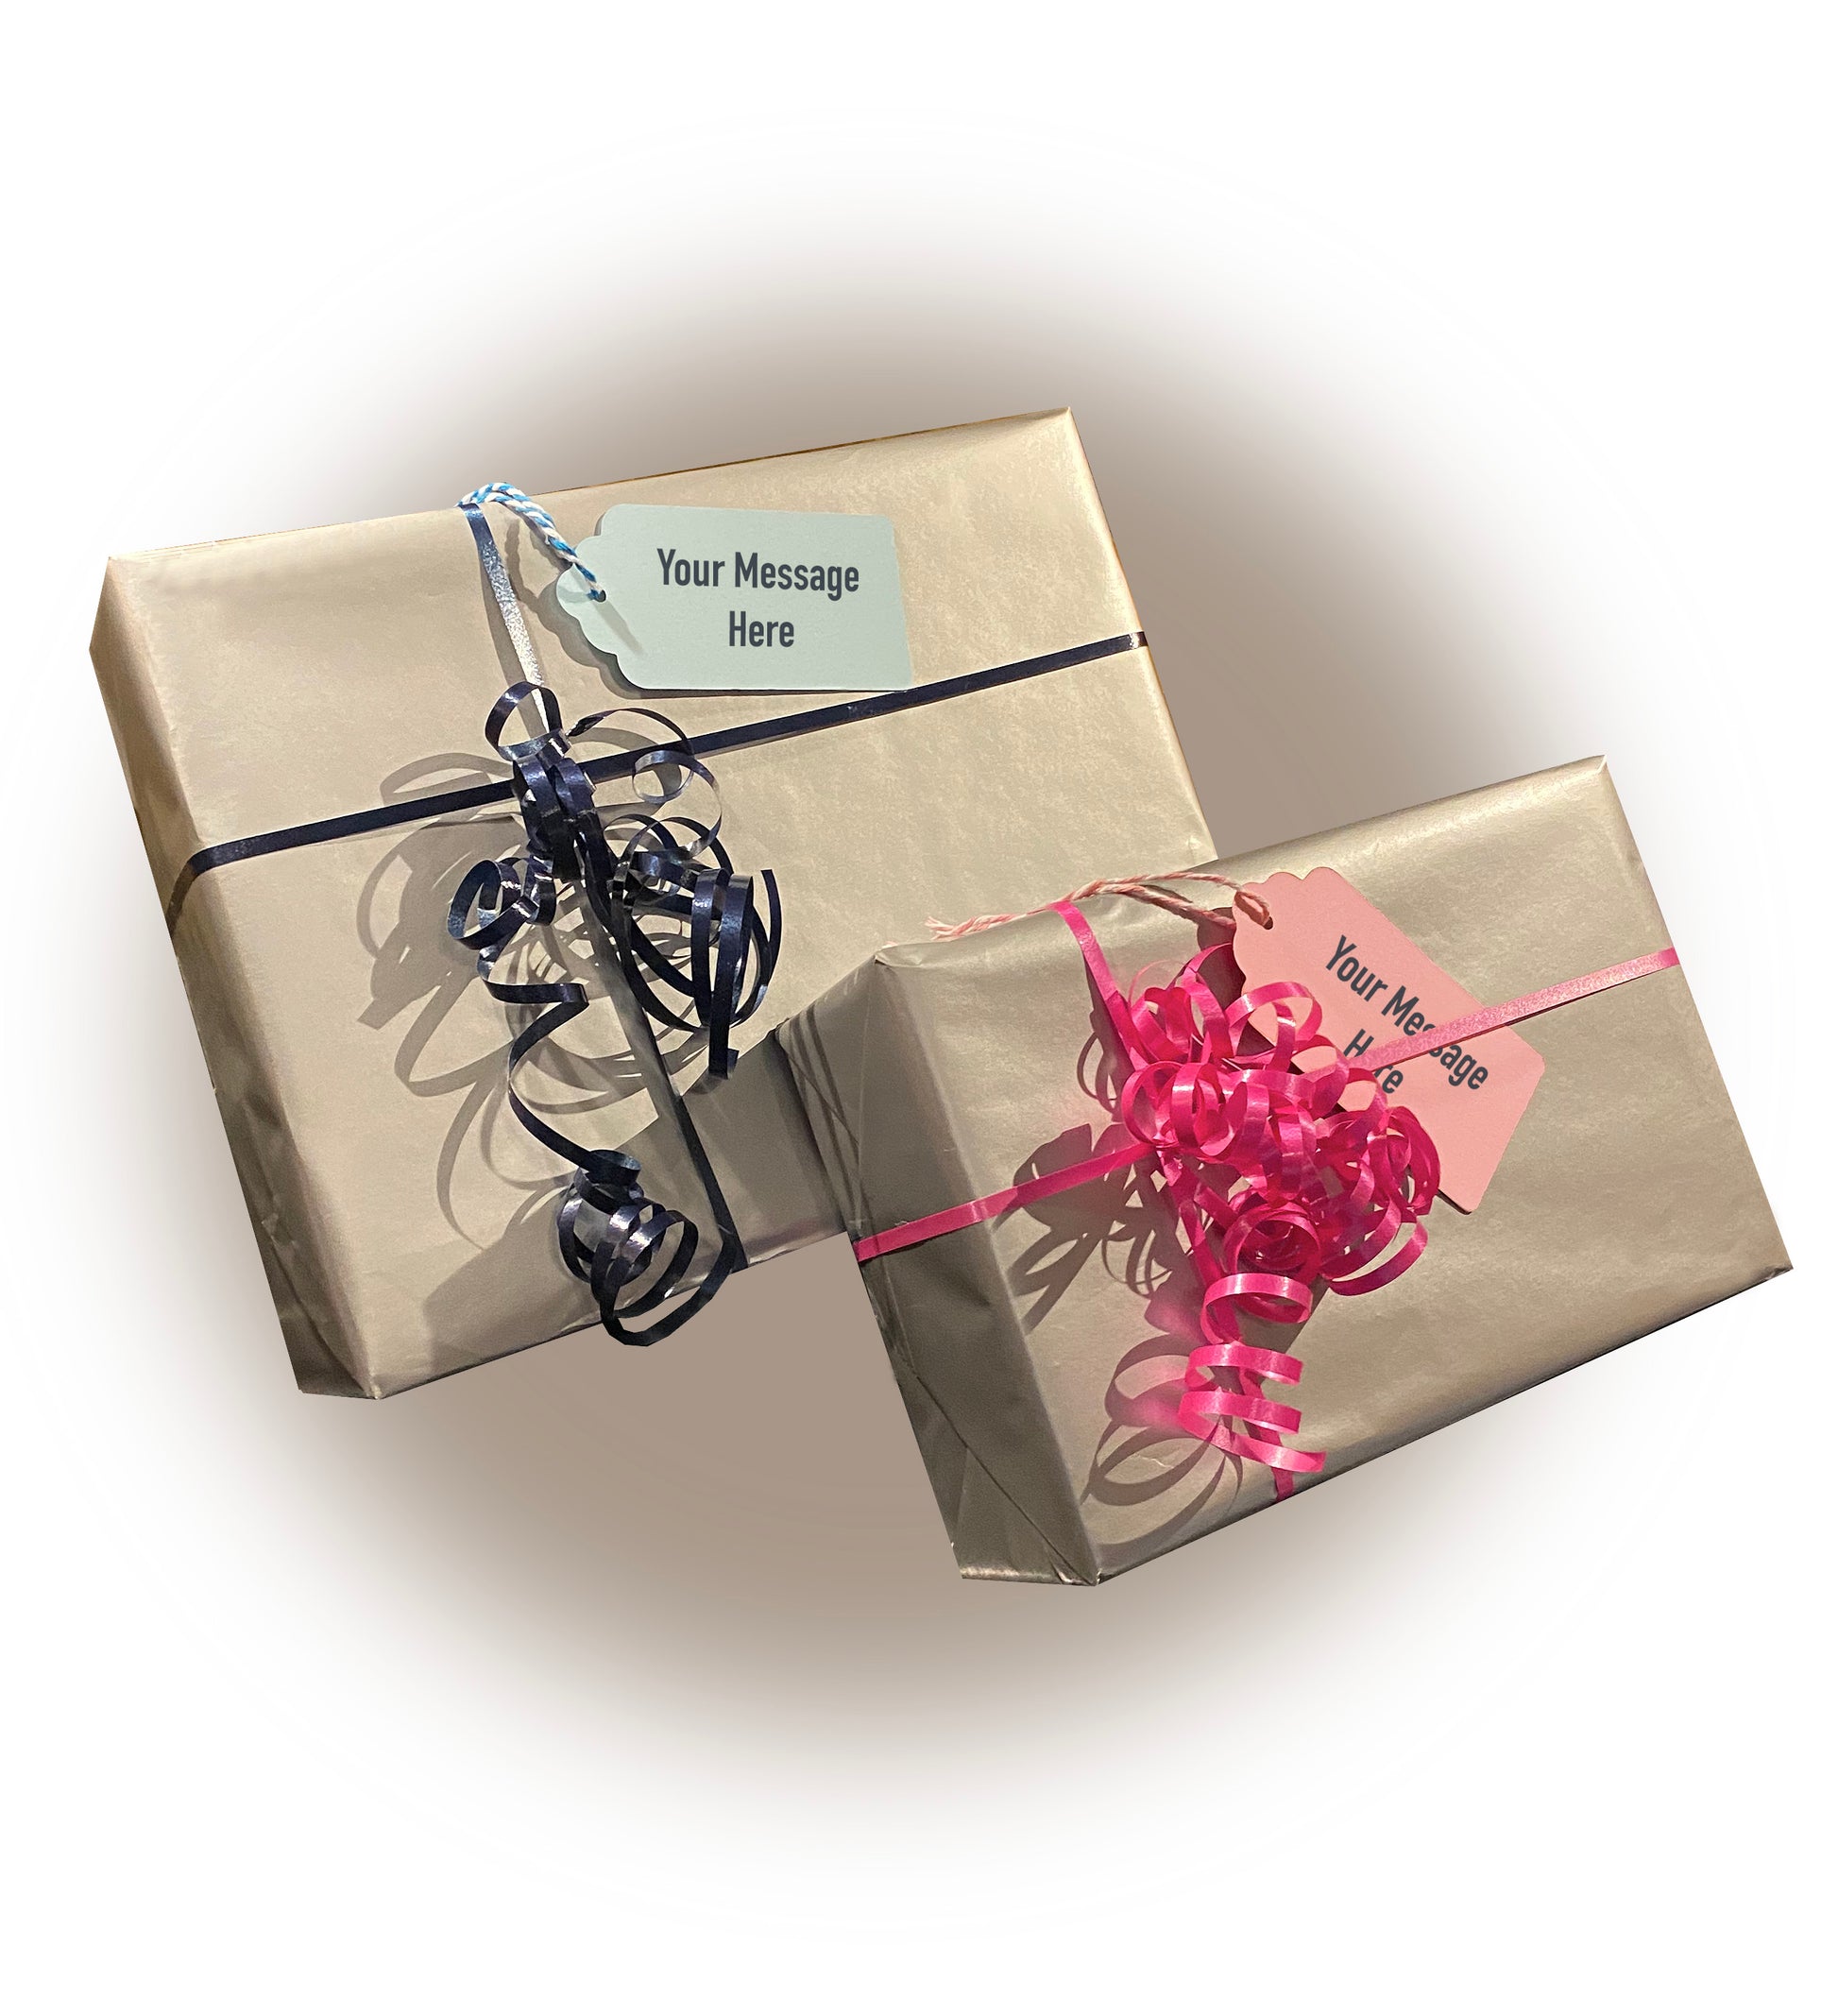 Picture of party box gift wrapped